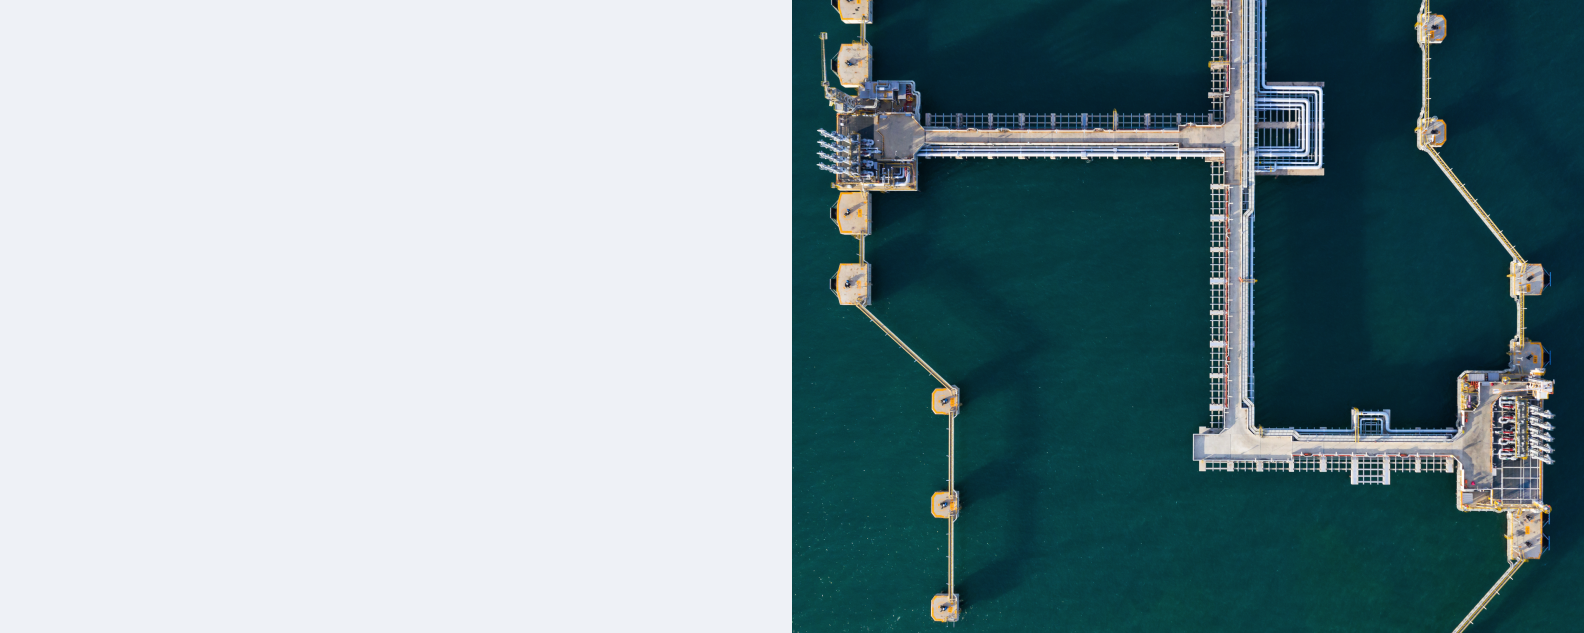 Aerial view crude oil and gas terminal, Loading arm oil and gas refinery at commercial port